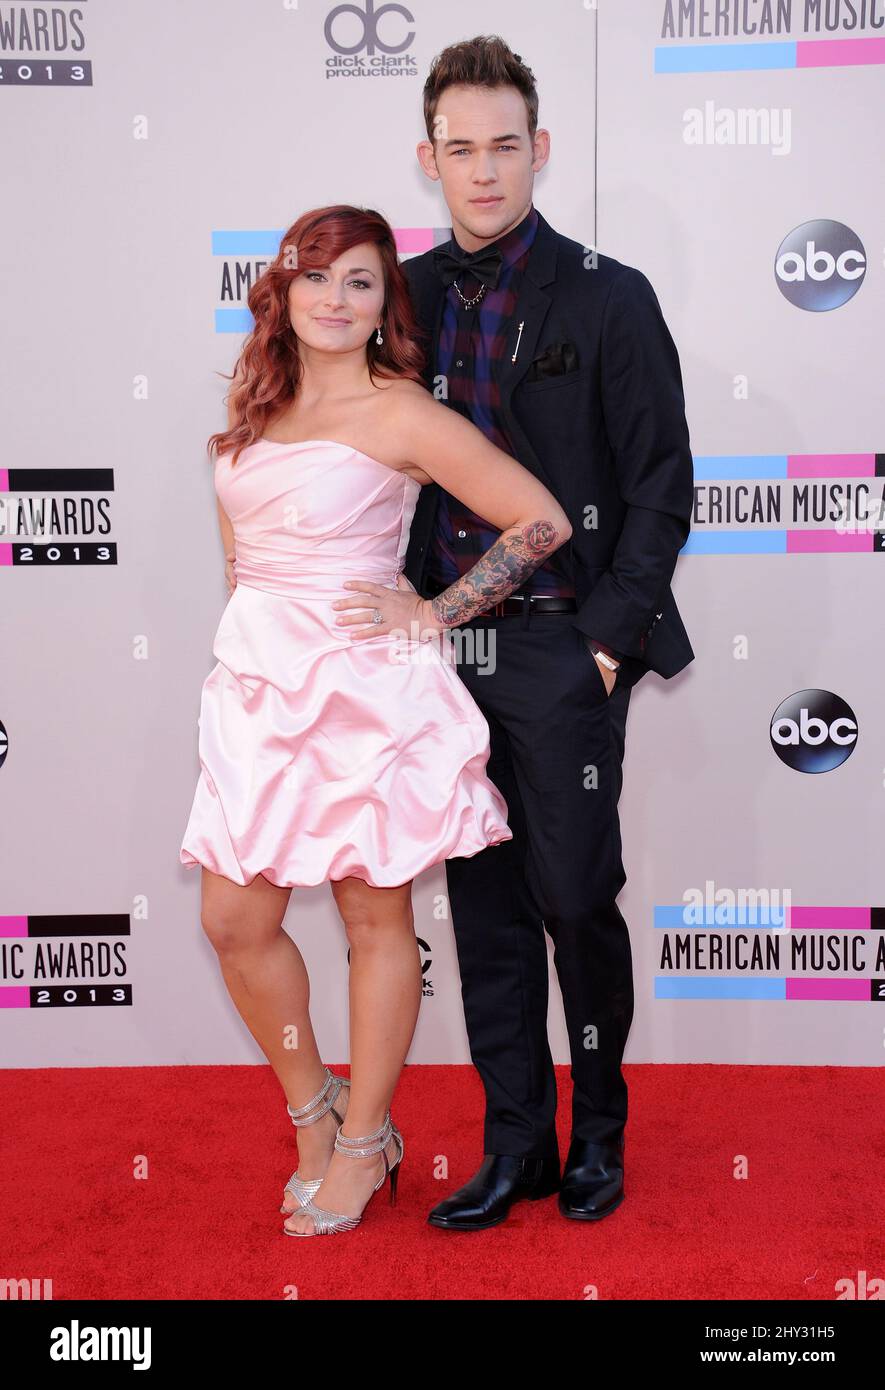 James Durbin and Heidi attending the 2013 American Music Awards held at Nokia Theatre L.A. Live in Los Angeles, USA. Stock Photo